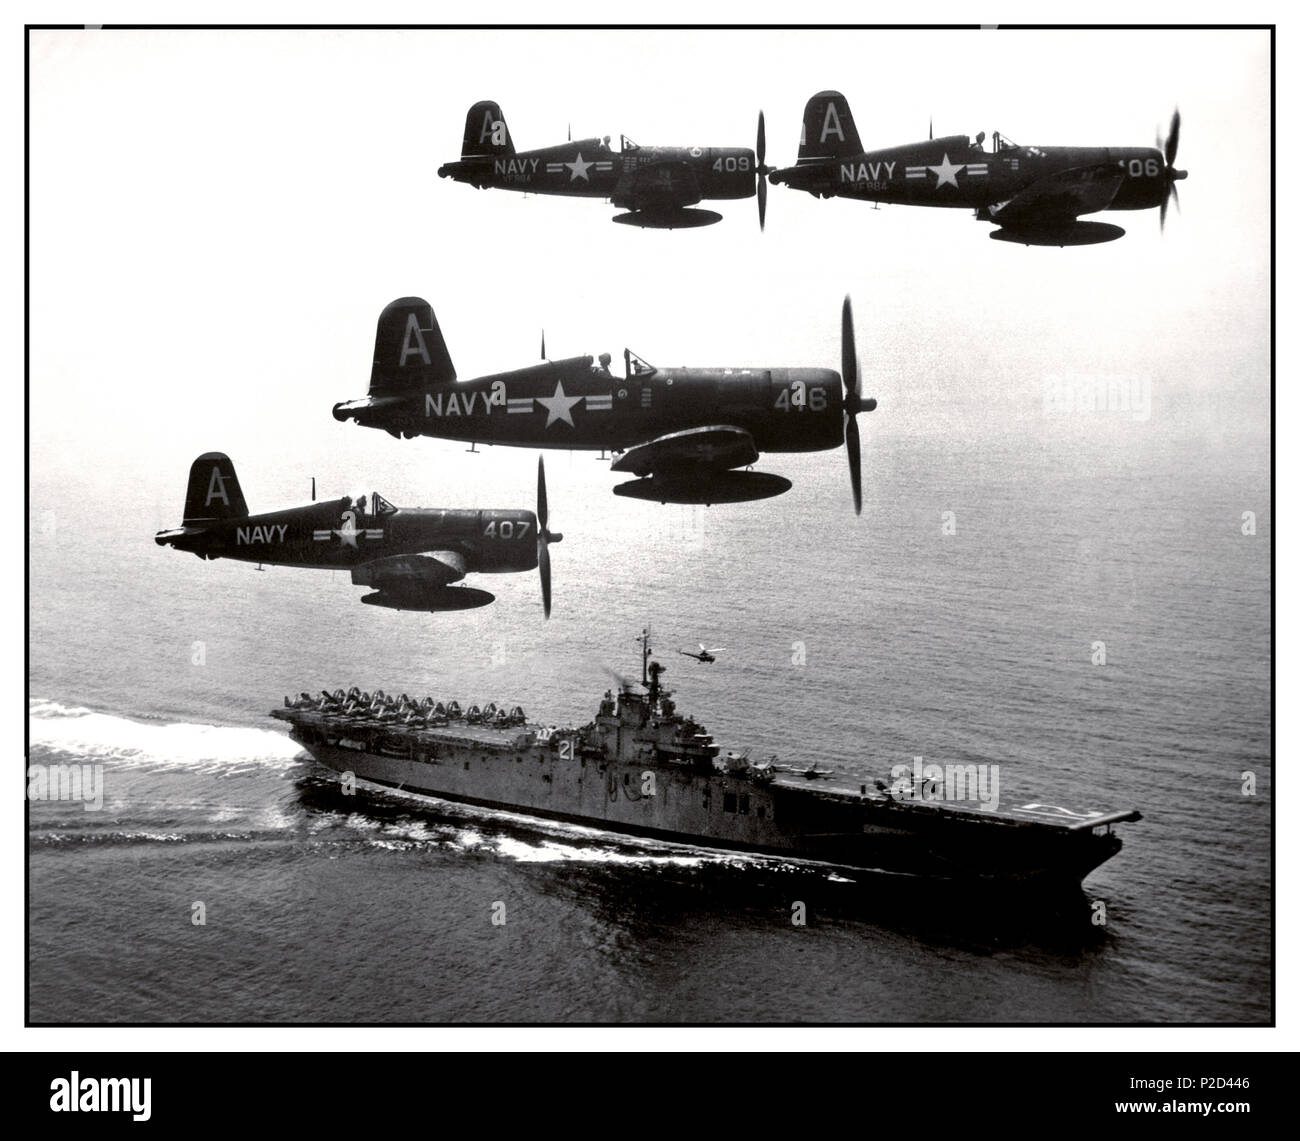 1951 War North Korea F4U's (Corsairs) returning from a combat mission over North Korea circle the USS Boxer as they wait for planes in the next strike to be launched from her flight deck - a helicopter hovers above the ship.  September 4, 1951. Stock Photo